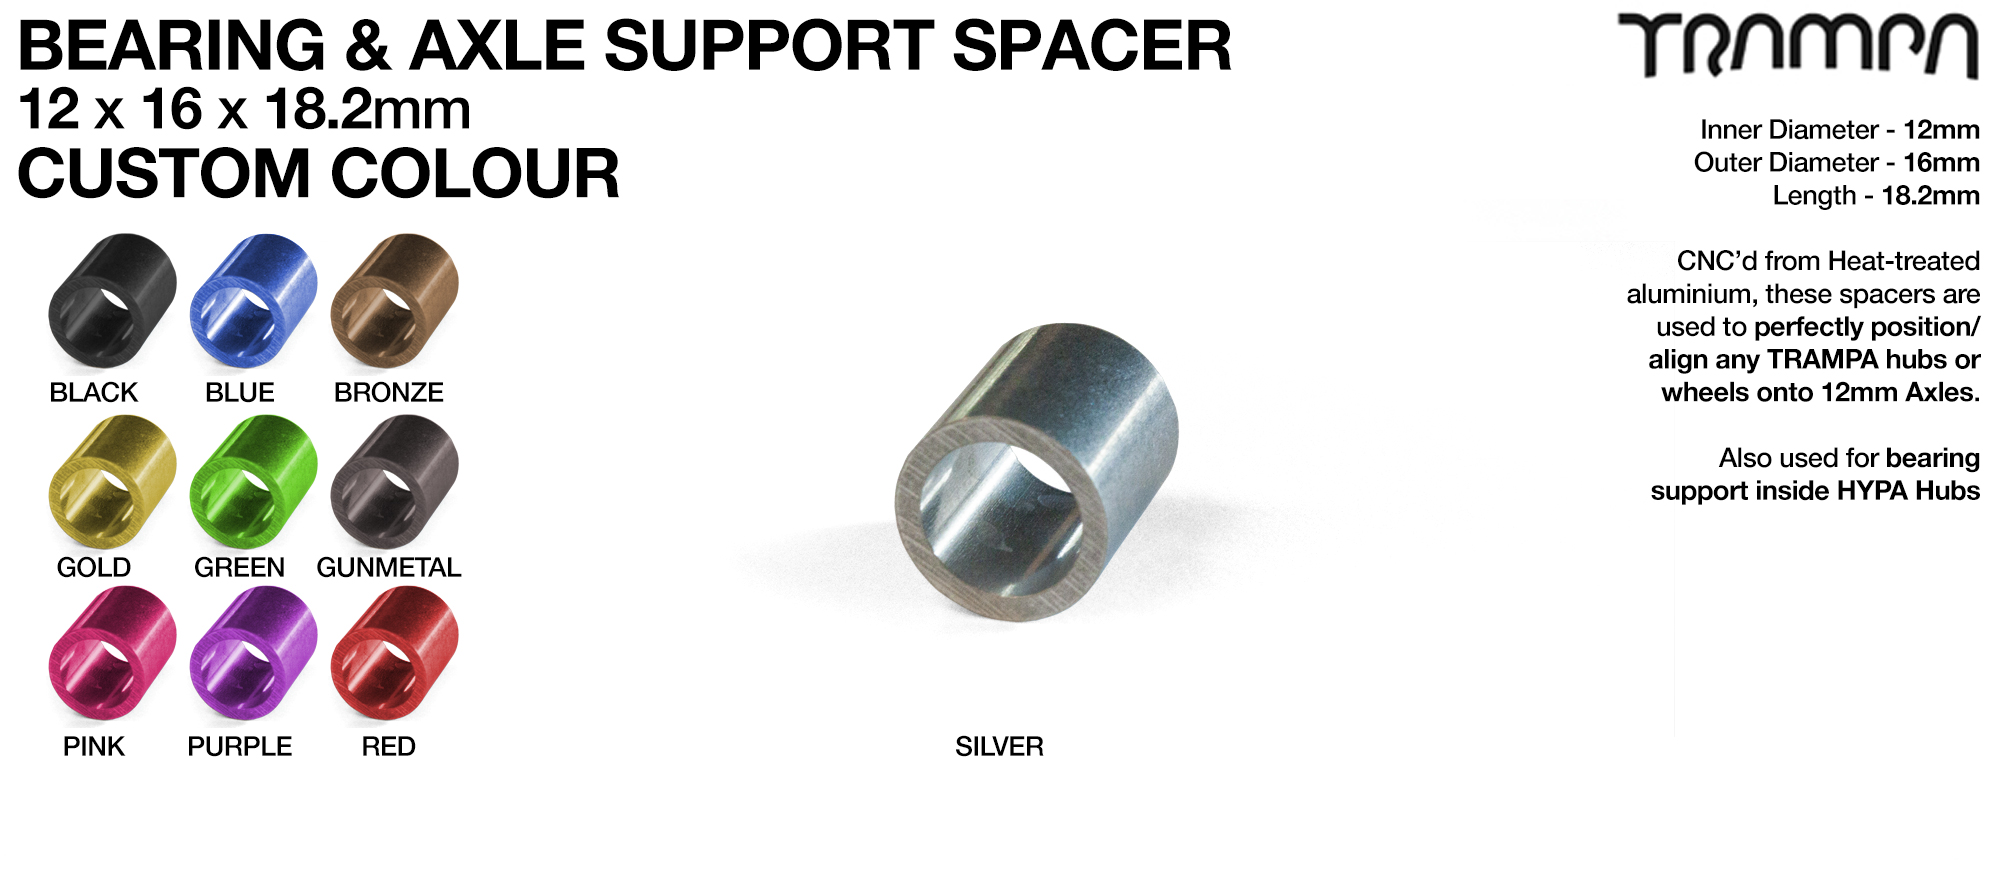 Wheel support spacer for all TRAMPA Wheels on 12mm ATB Axles - CNC precision 12mm x 16mm x 18.2mm